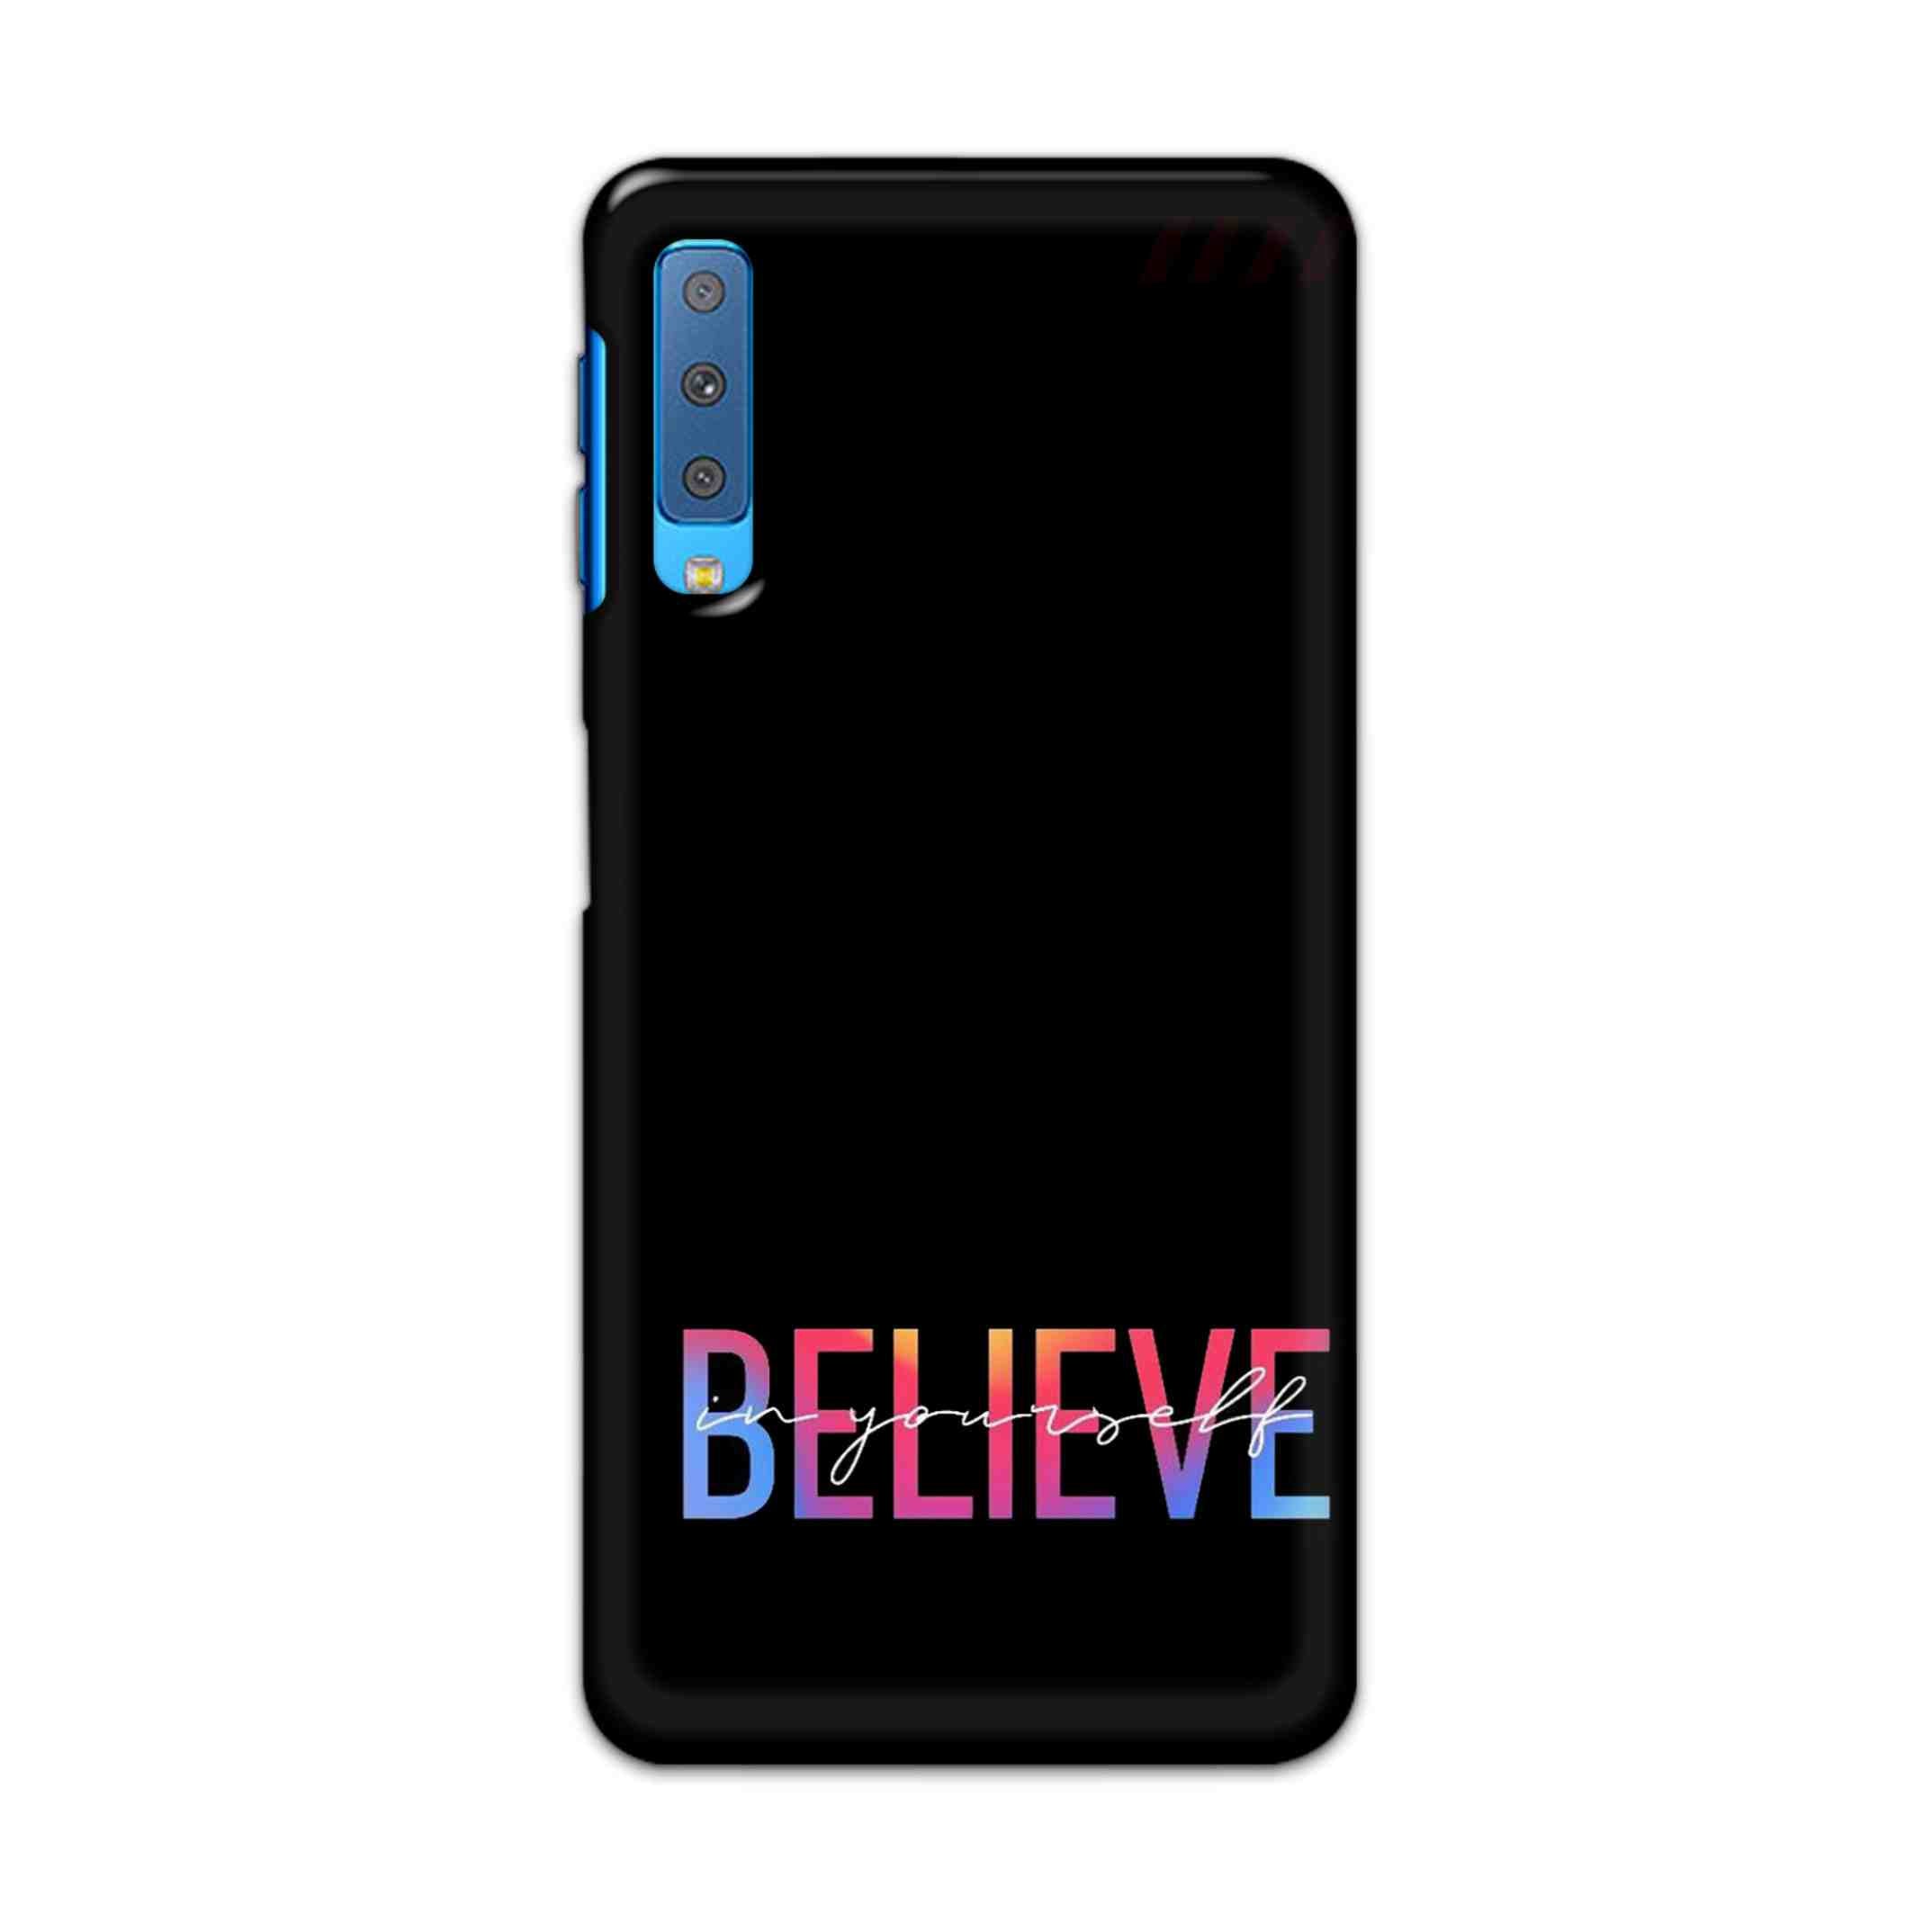 Buy Believe Hard Back Mobile Phone Case Cover For Samsung Galaxy A7 2018 Online